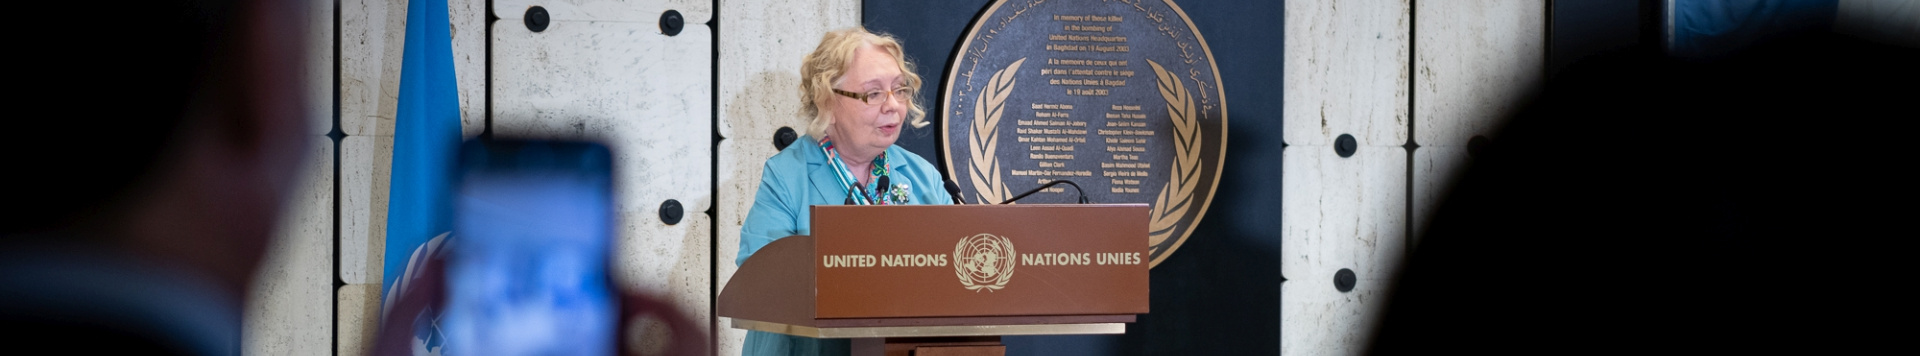 The Director-General of UN Geneva, Tatiana Valovaya, holding a speech for World Humantarian Day. She stands at a speakers desk with a UN flag and the UN logo behind.